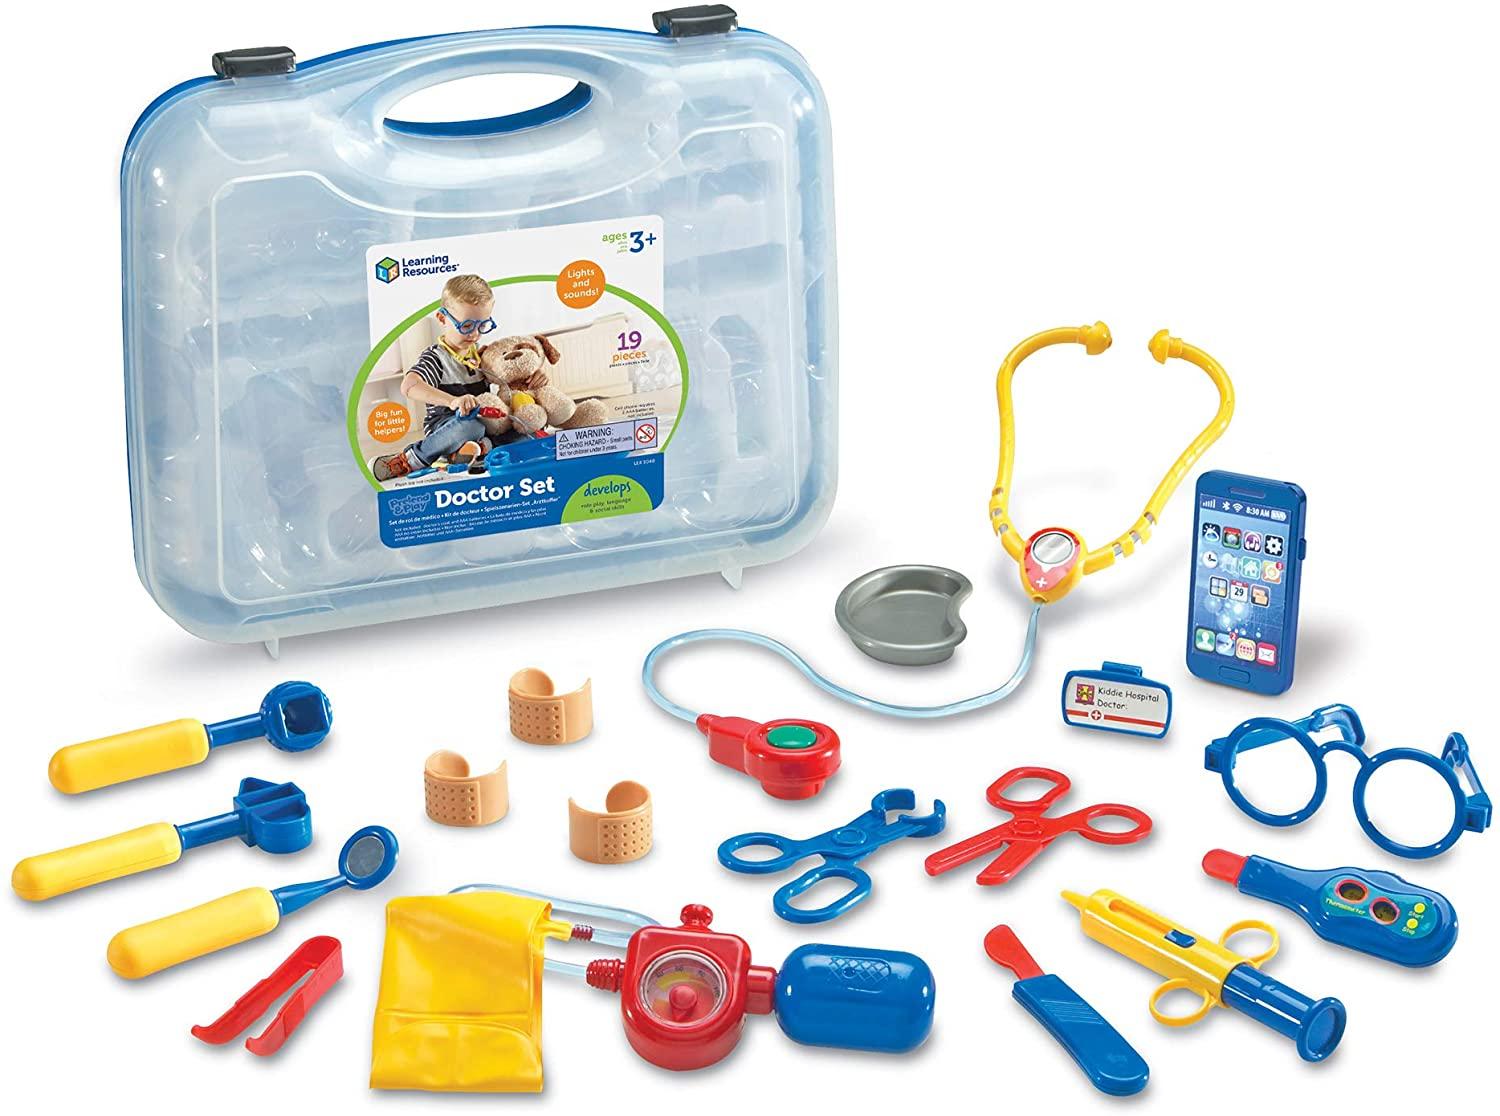 19-Piece Learning Resources Pretend Play Doctor Kit for Kids for $18